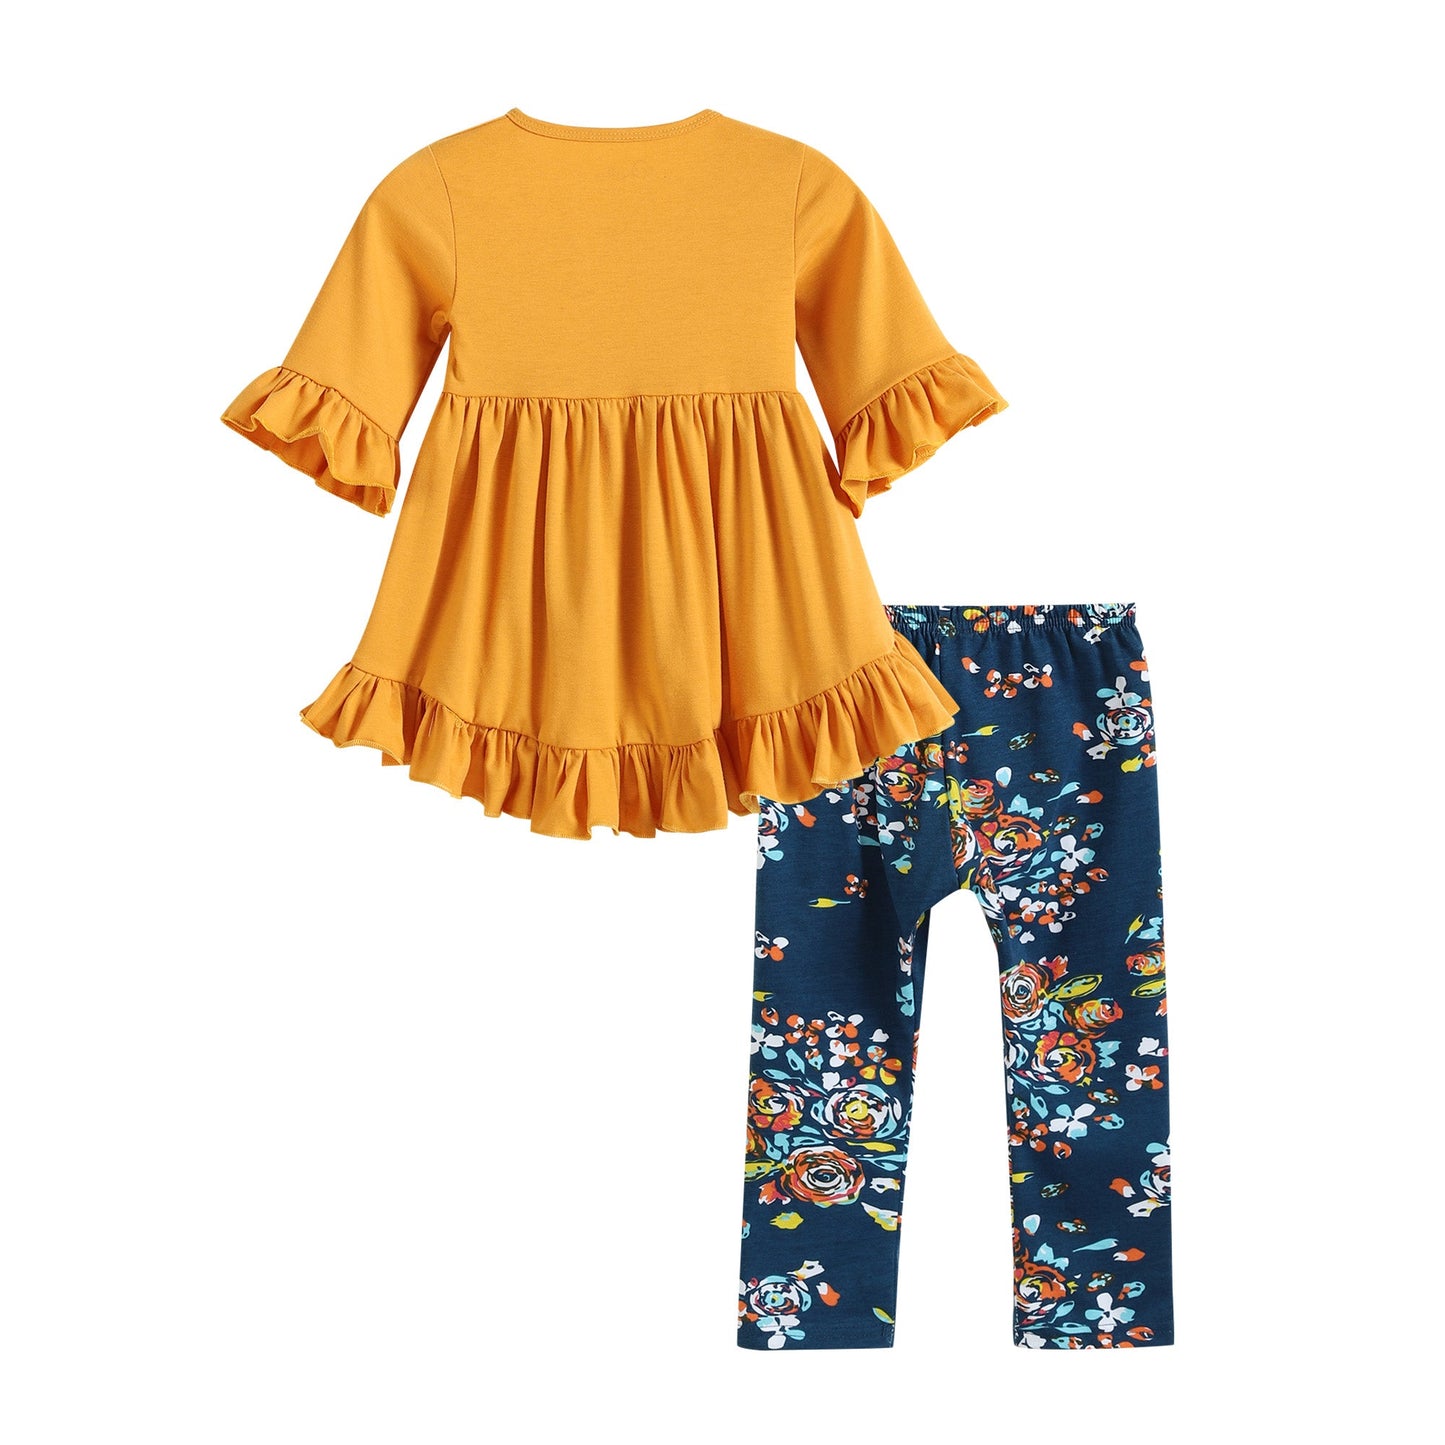 Ochre Tunic Top and Cobalt Floral Capris and Headband Set